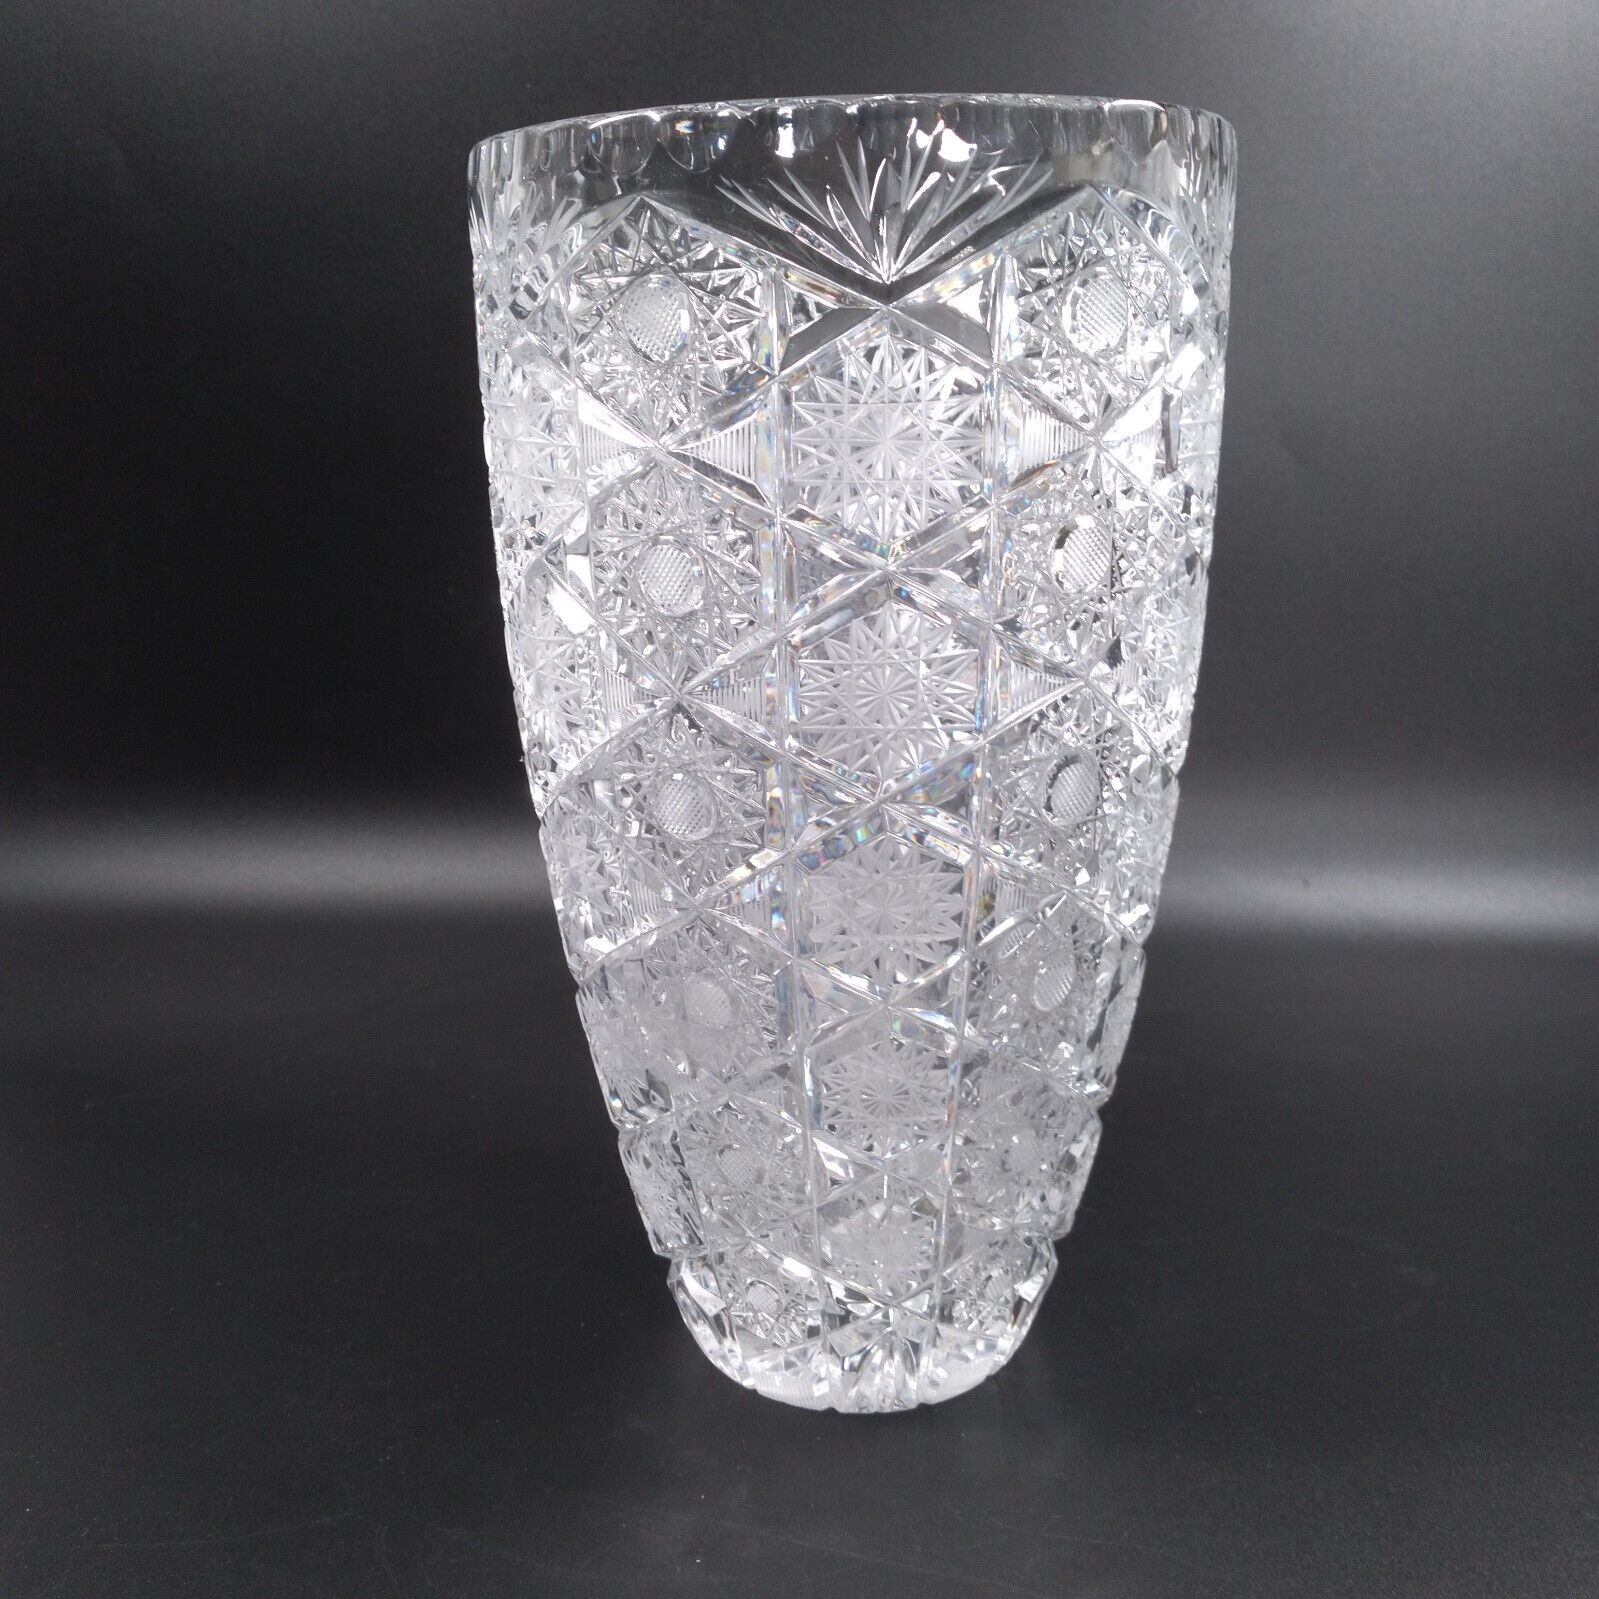 Czech Crystal Vase Cut & Etched Stars in Diamond Pattern Curved into Notched Top